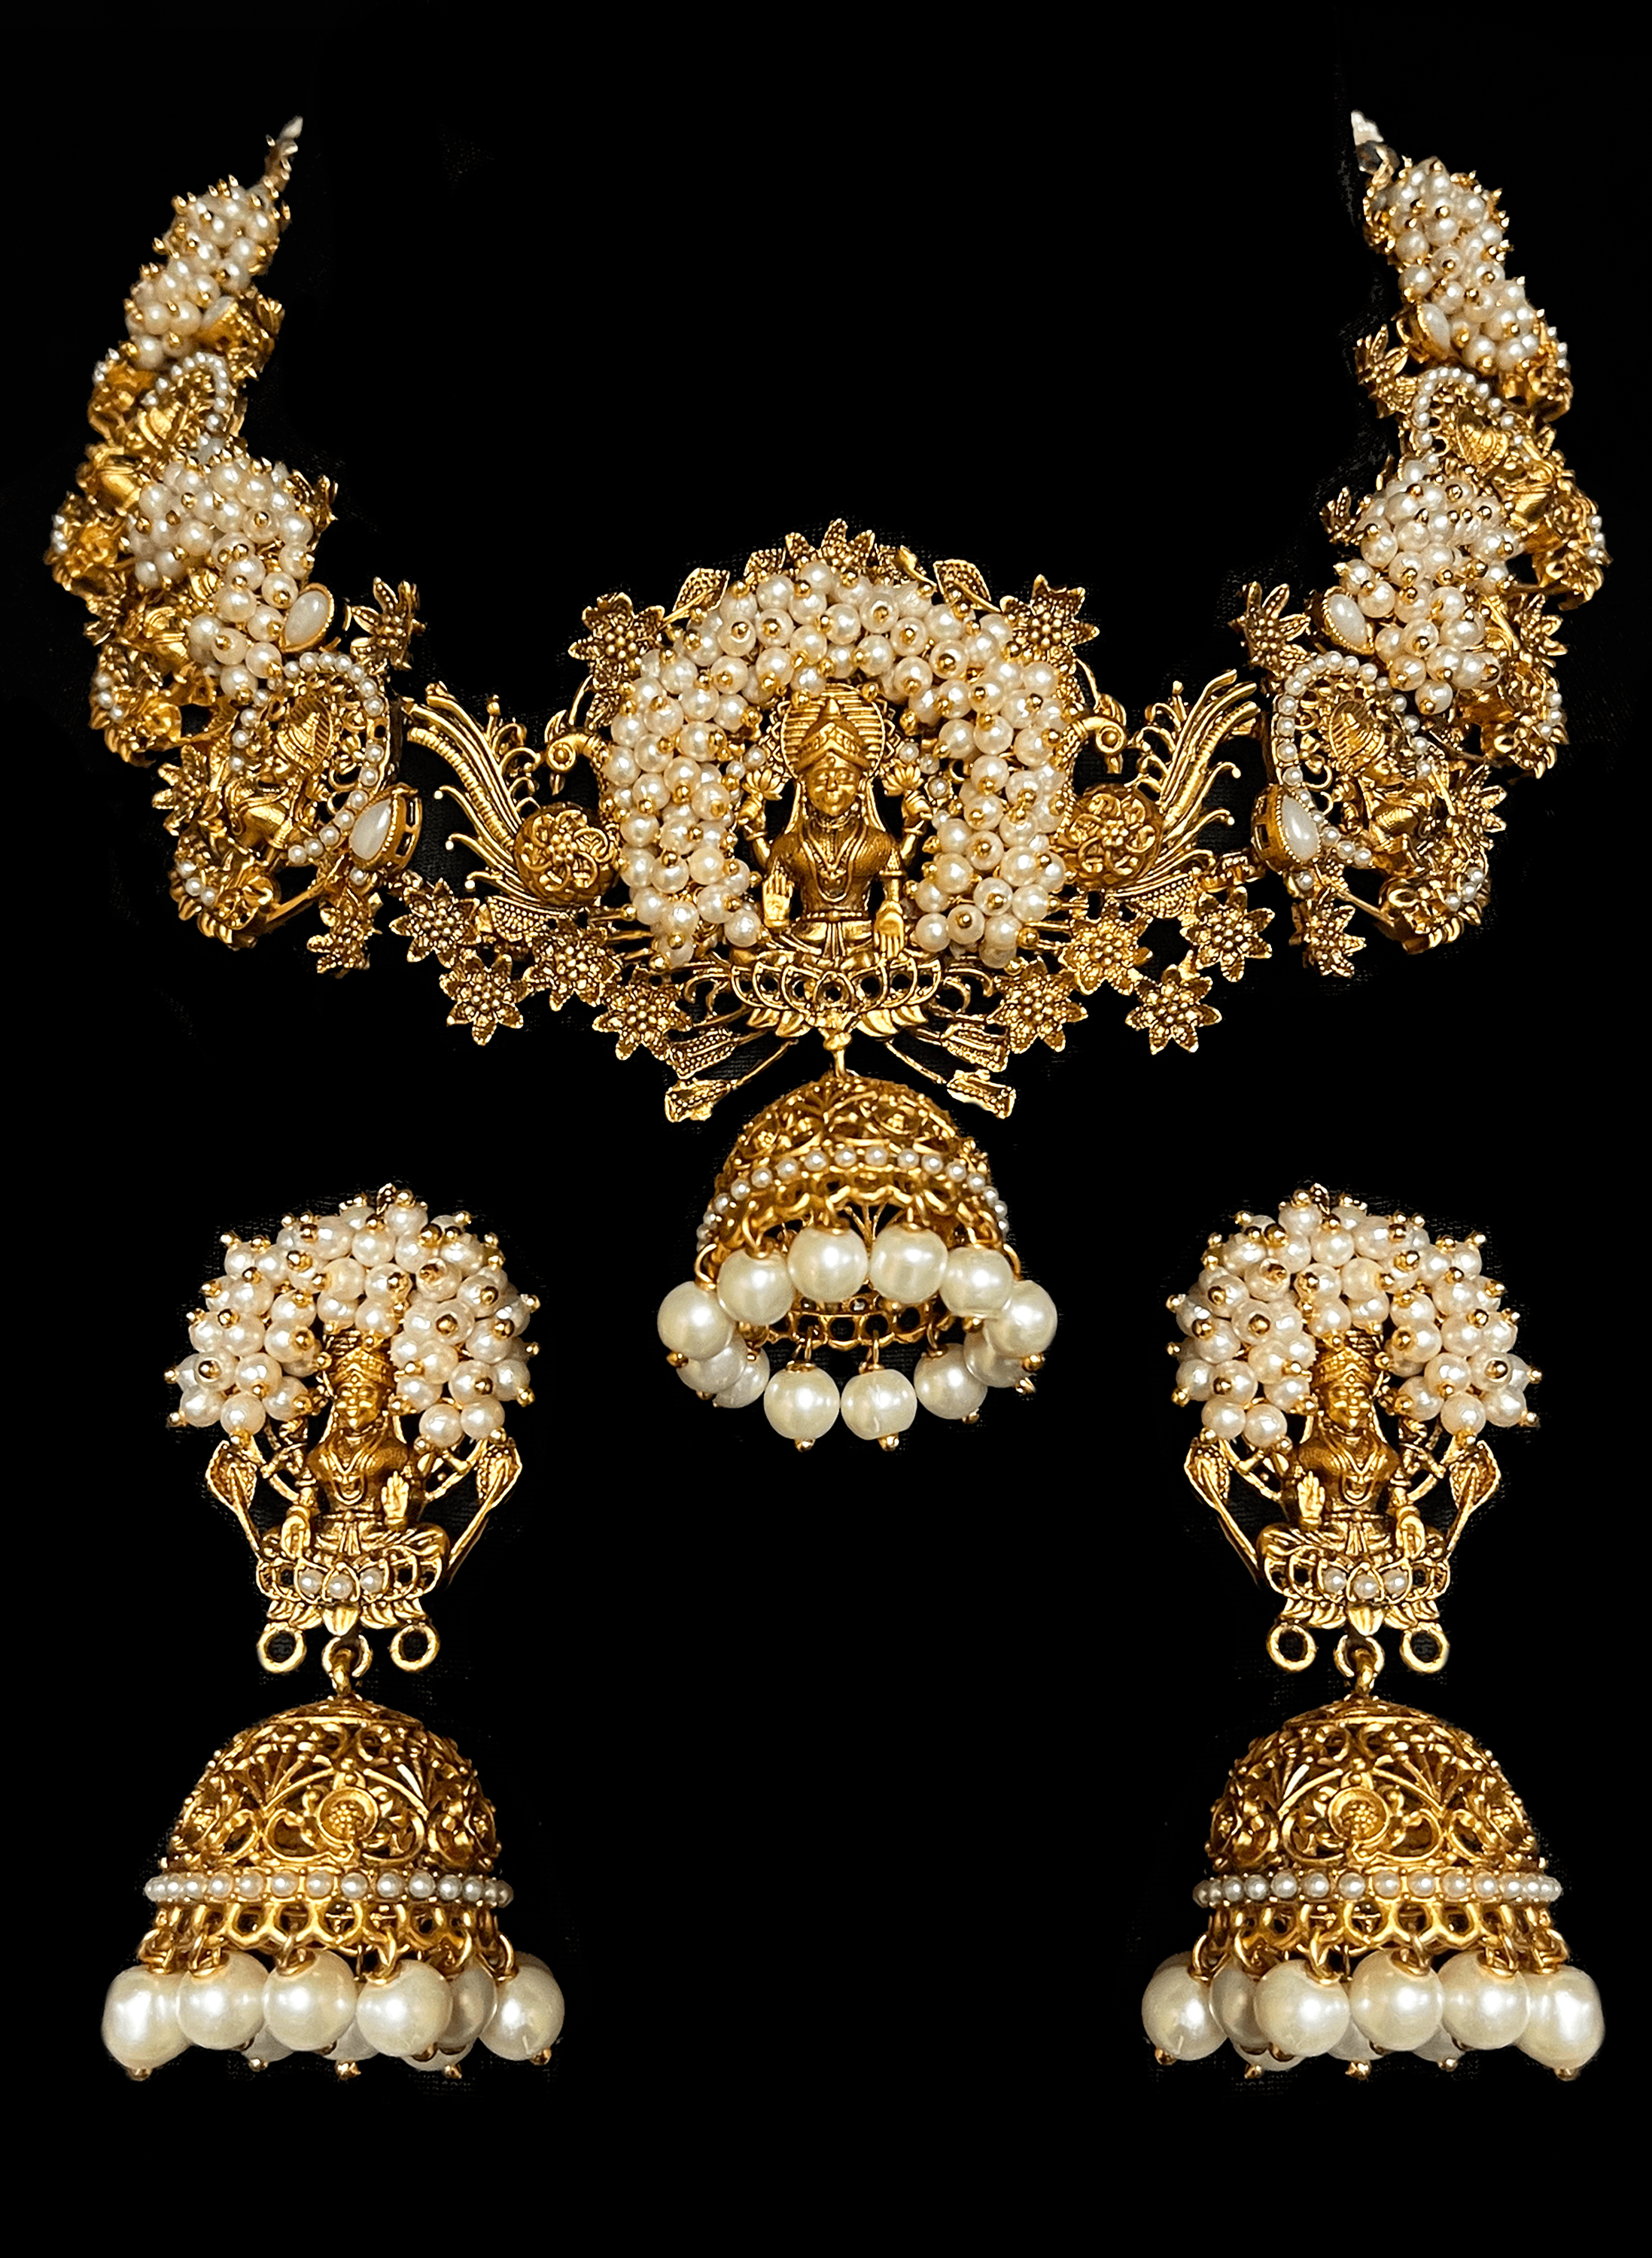 Mugdha - South Indian Temple Jewelry w/ Cluster Pearls & Goddess Motif work